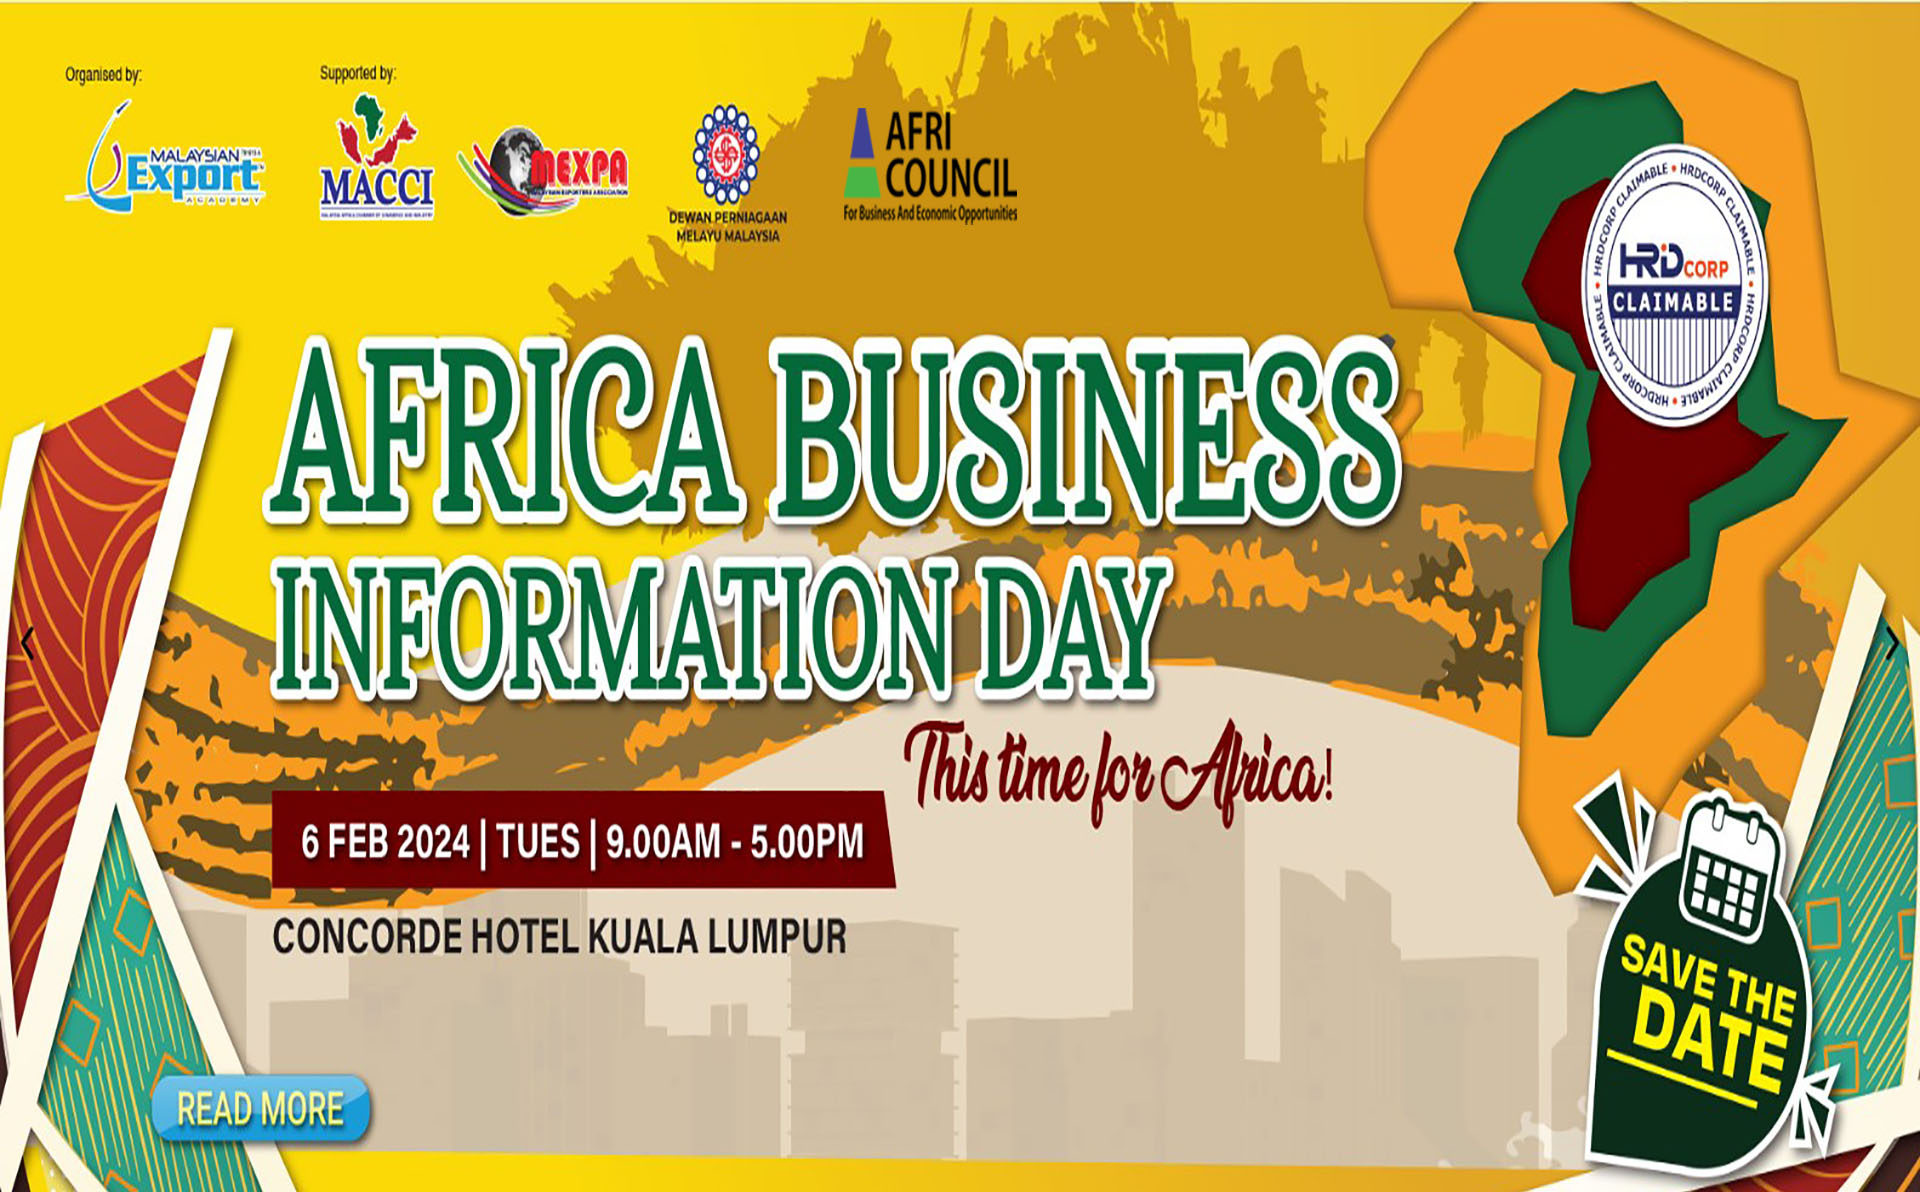 Malaysian Export Academy Announces Africa Business Information Day 2024 to Unlock Opportunities and Foster Collaboration with Afri Council